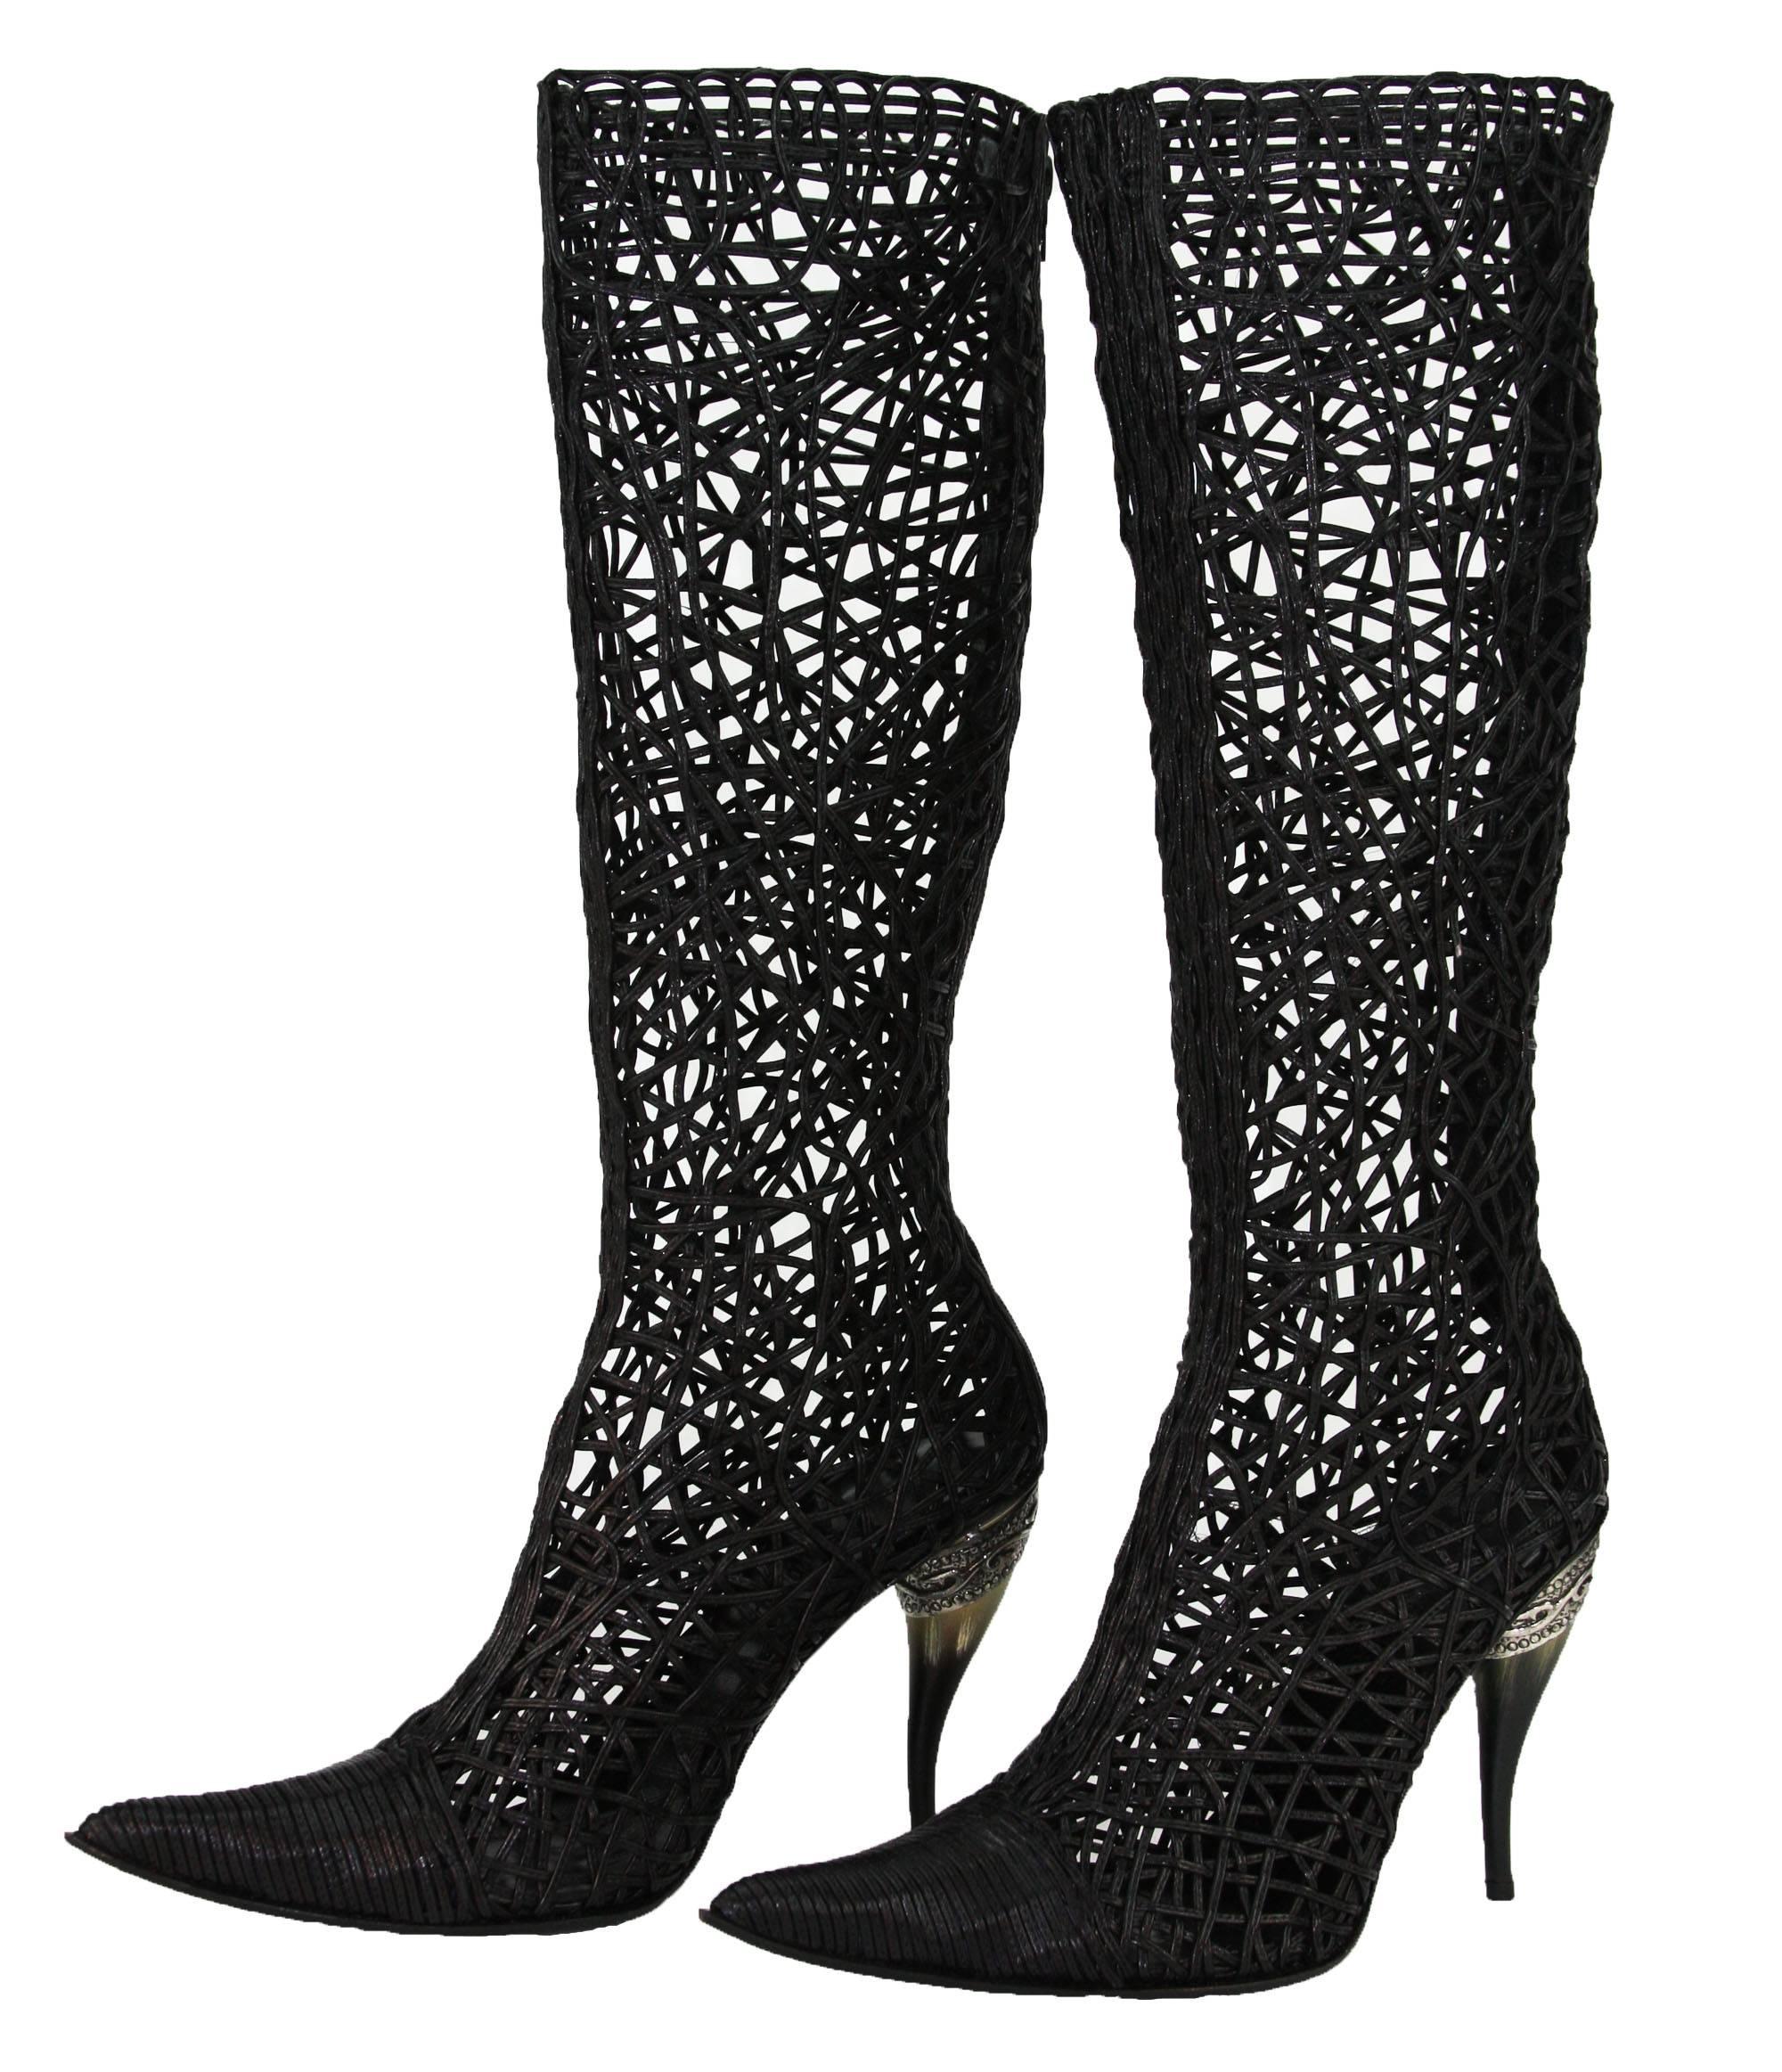 Black New GIANNI BARBATO BRAIDED LEATHER CAGE BOOTS